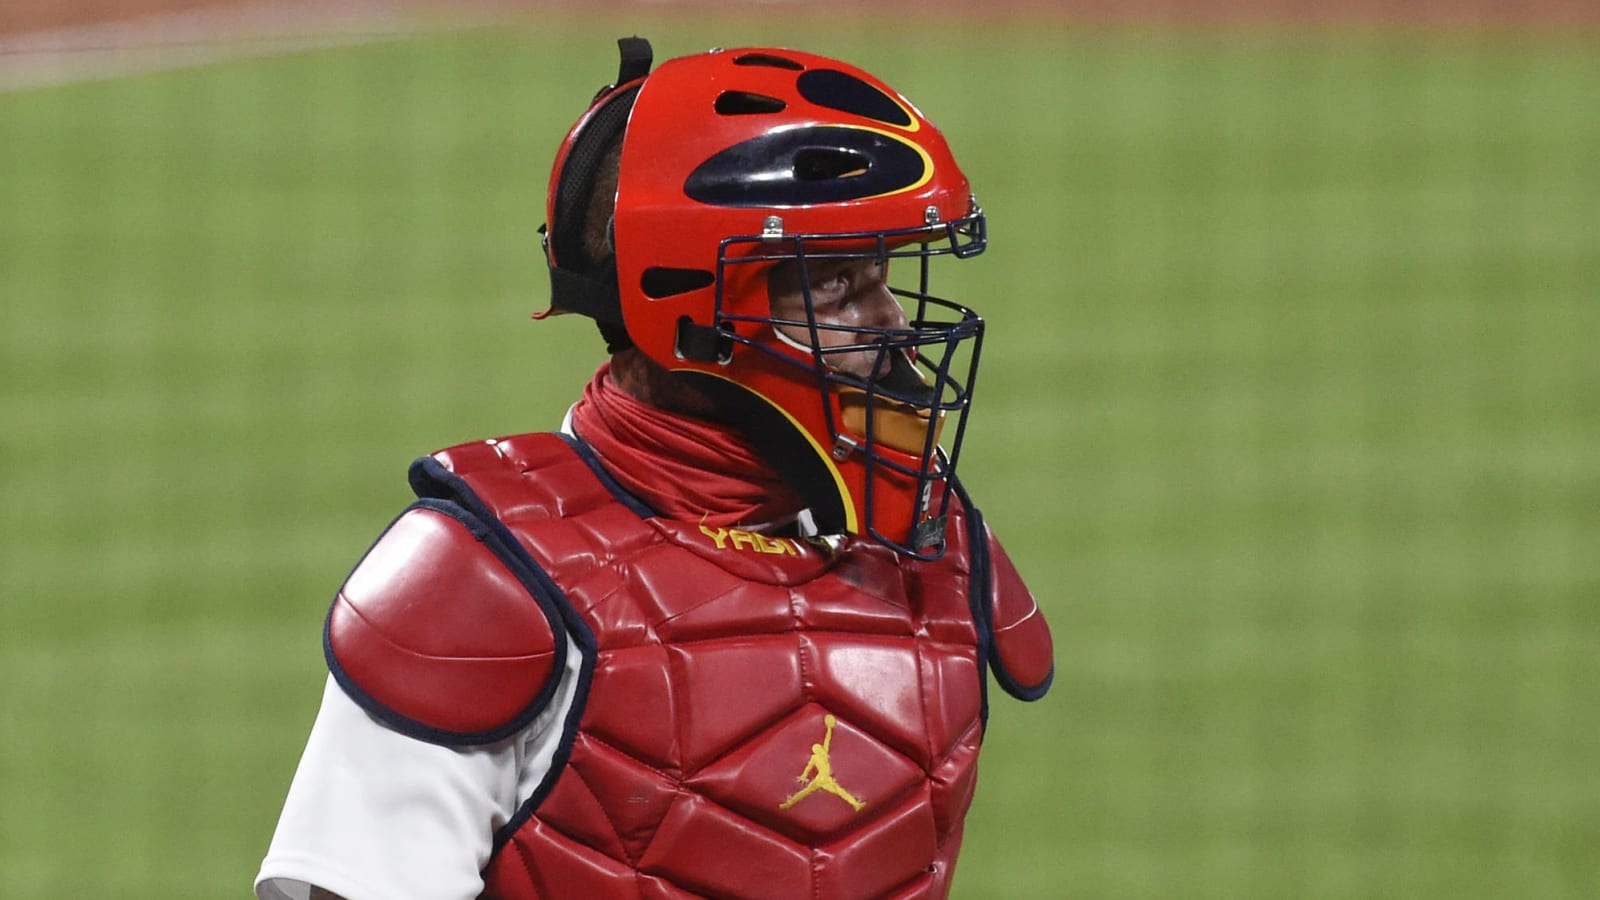 Yadier Molina says five teams have shown interest